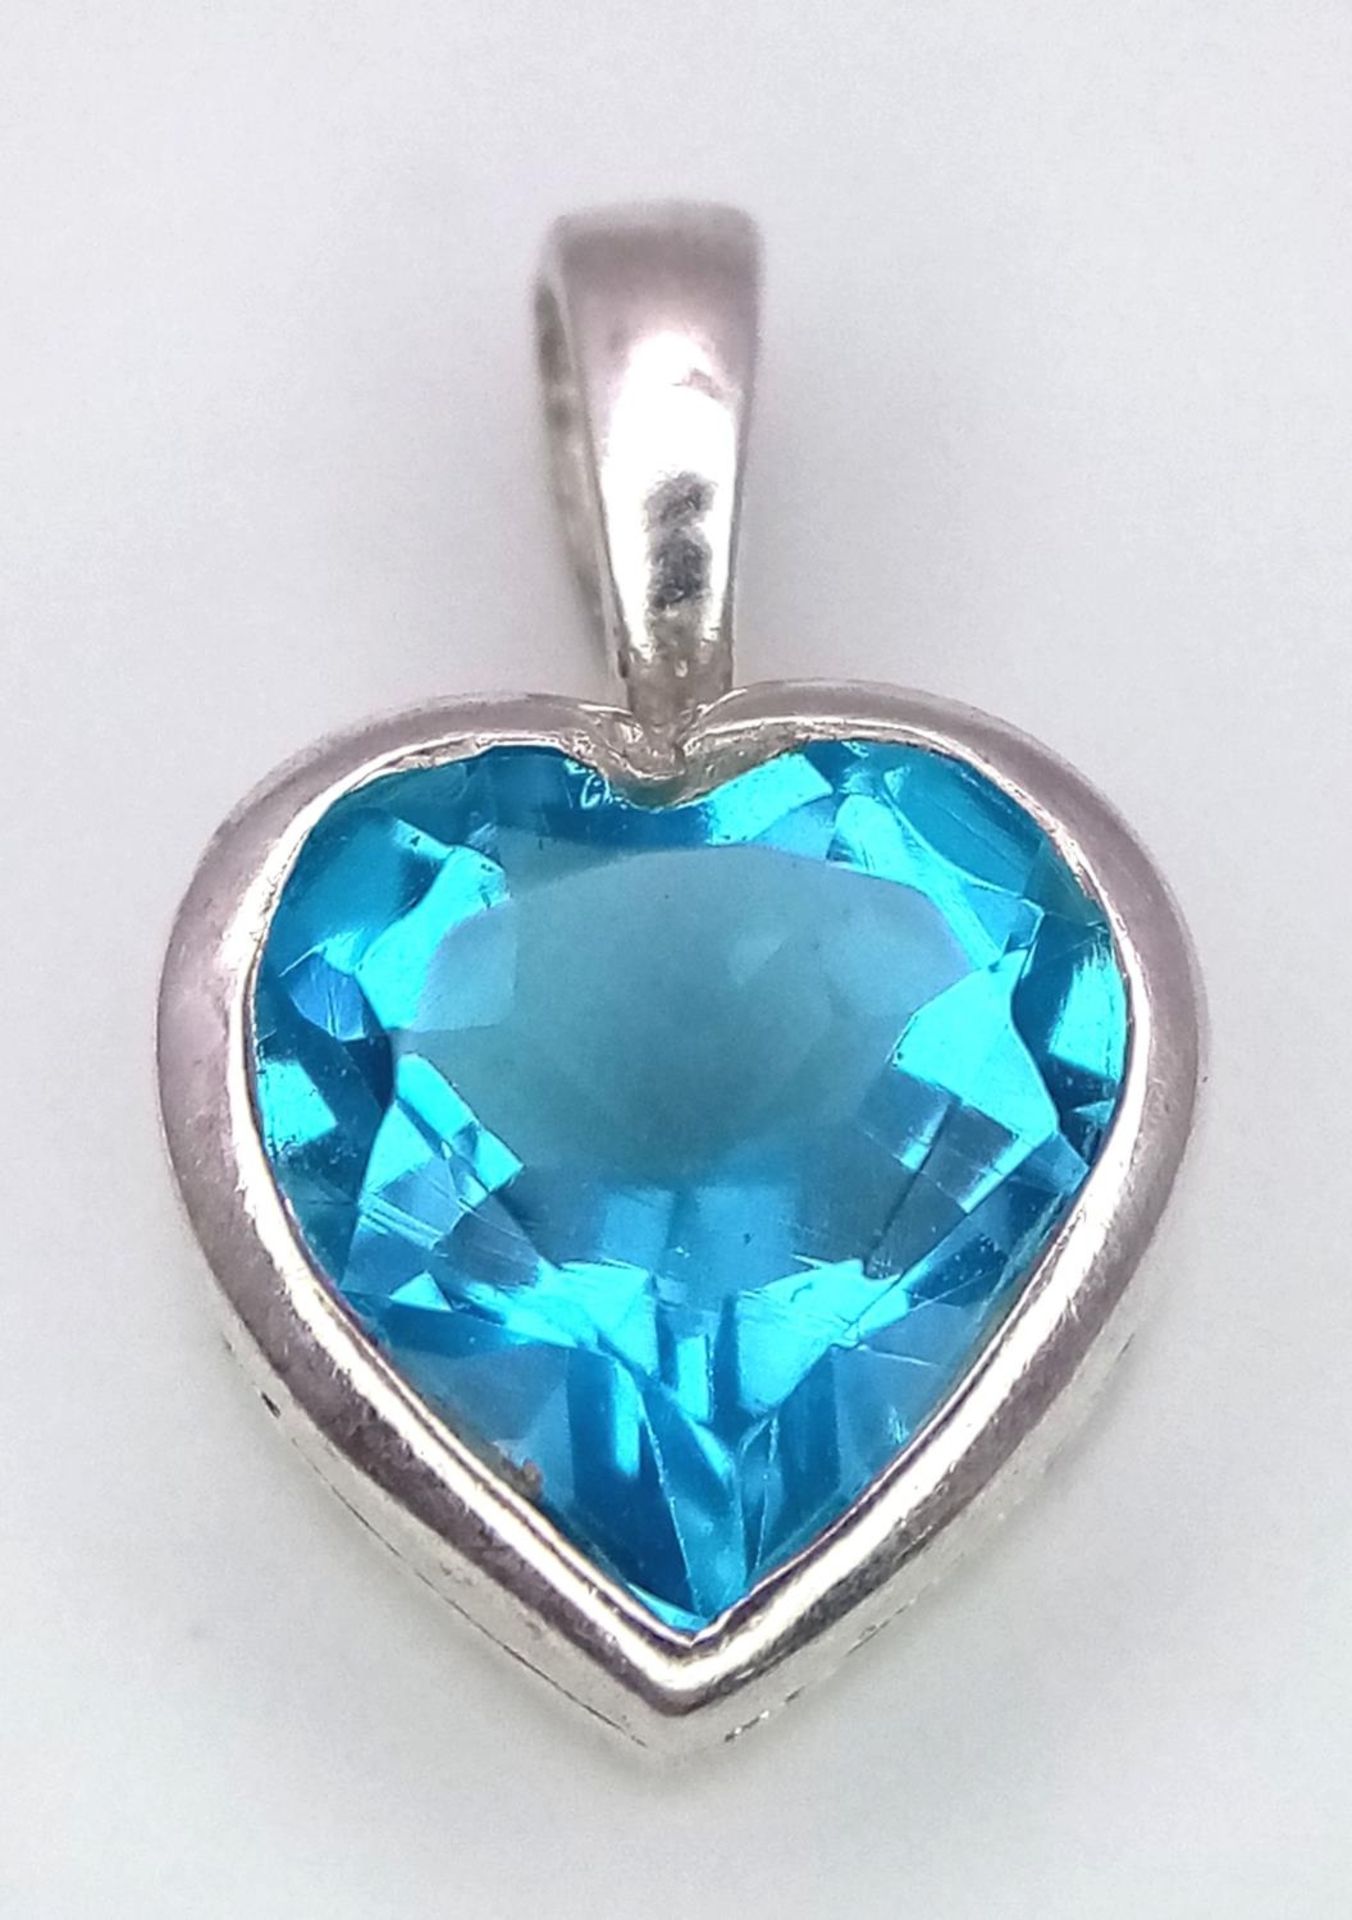 A Blue Topaz Heart Pendant on 925 Silver. 1.7cm length, 1.62g total weight. - Image 2 of 4